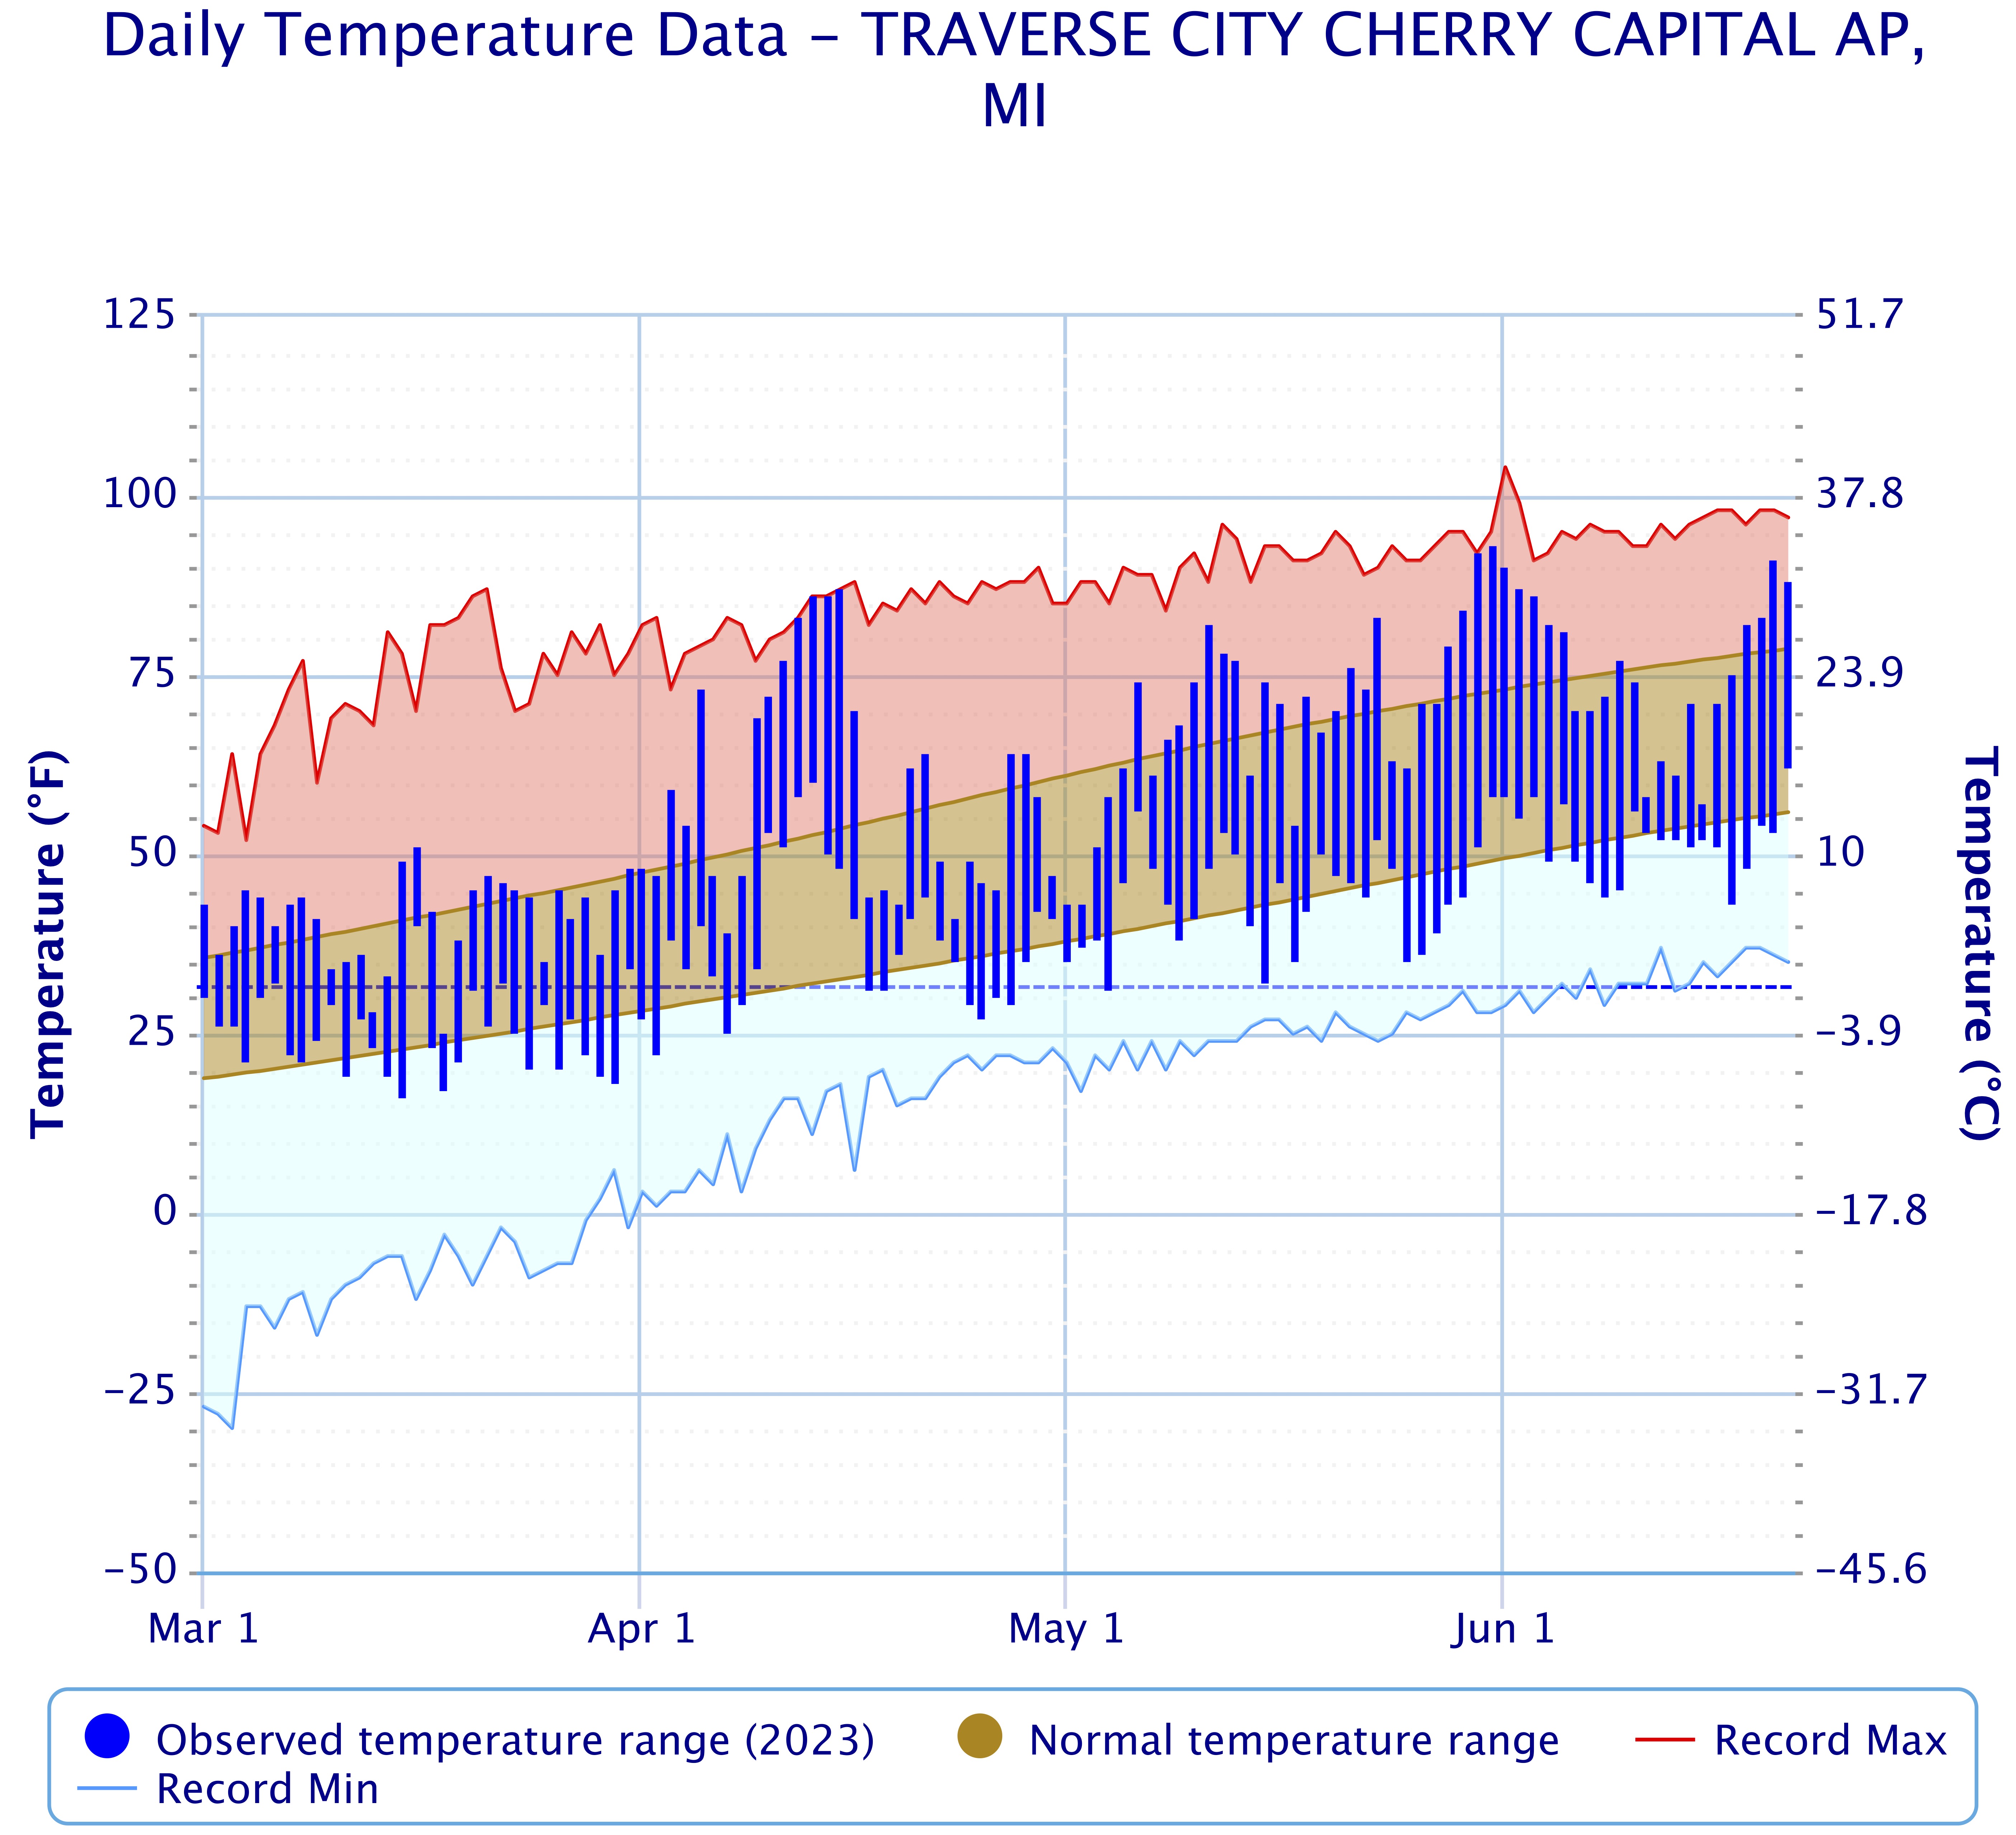 Daily temperature chart from March 1-June 21, 2023 with average low and high temperatures.